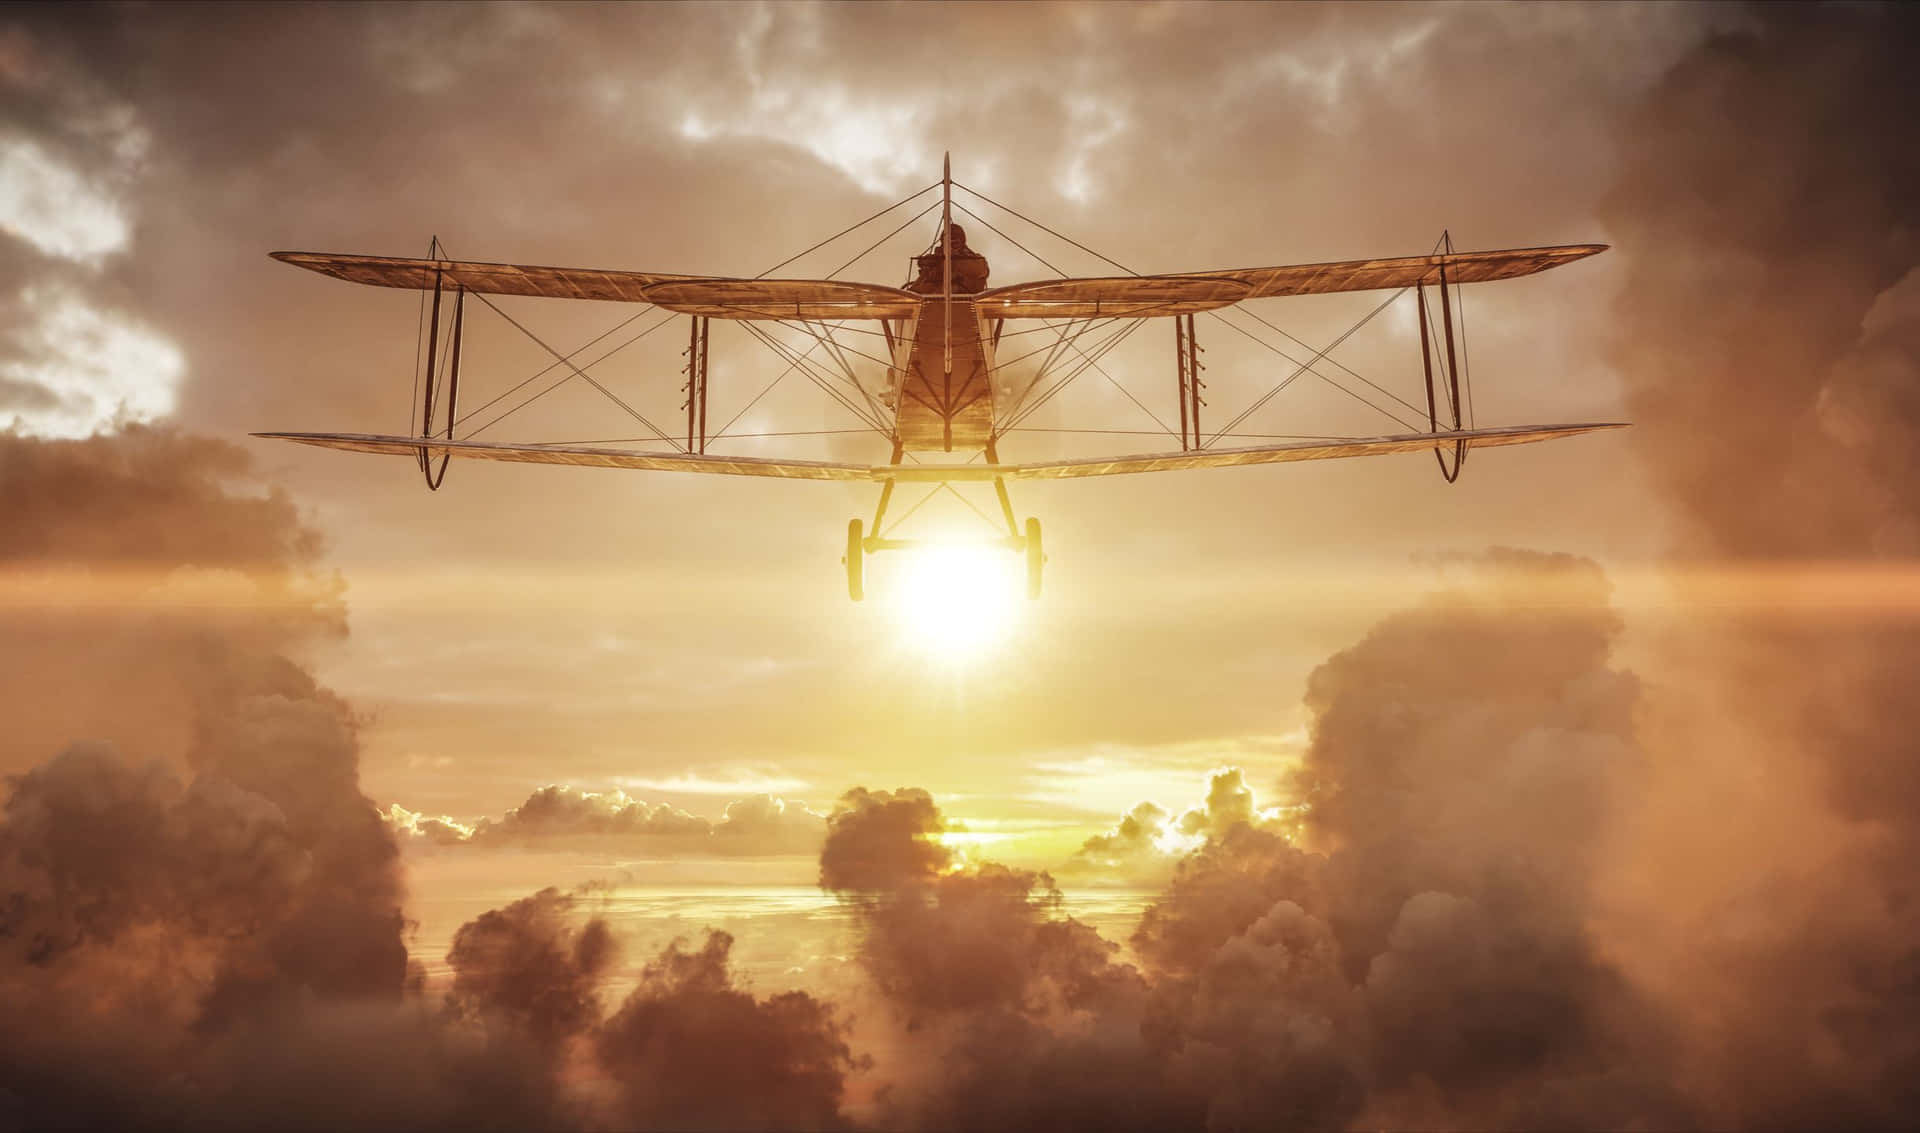 A Vintage Biplane Flying Through The Clouds